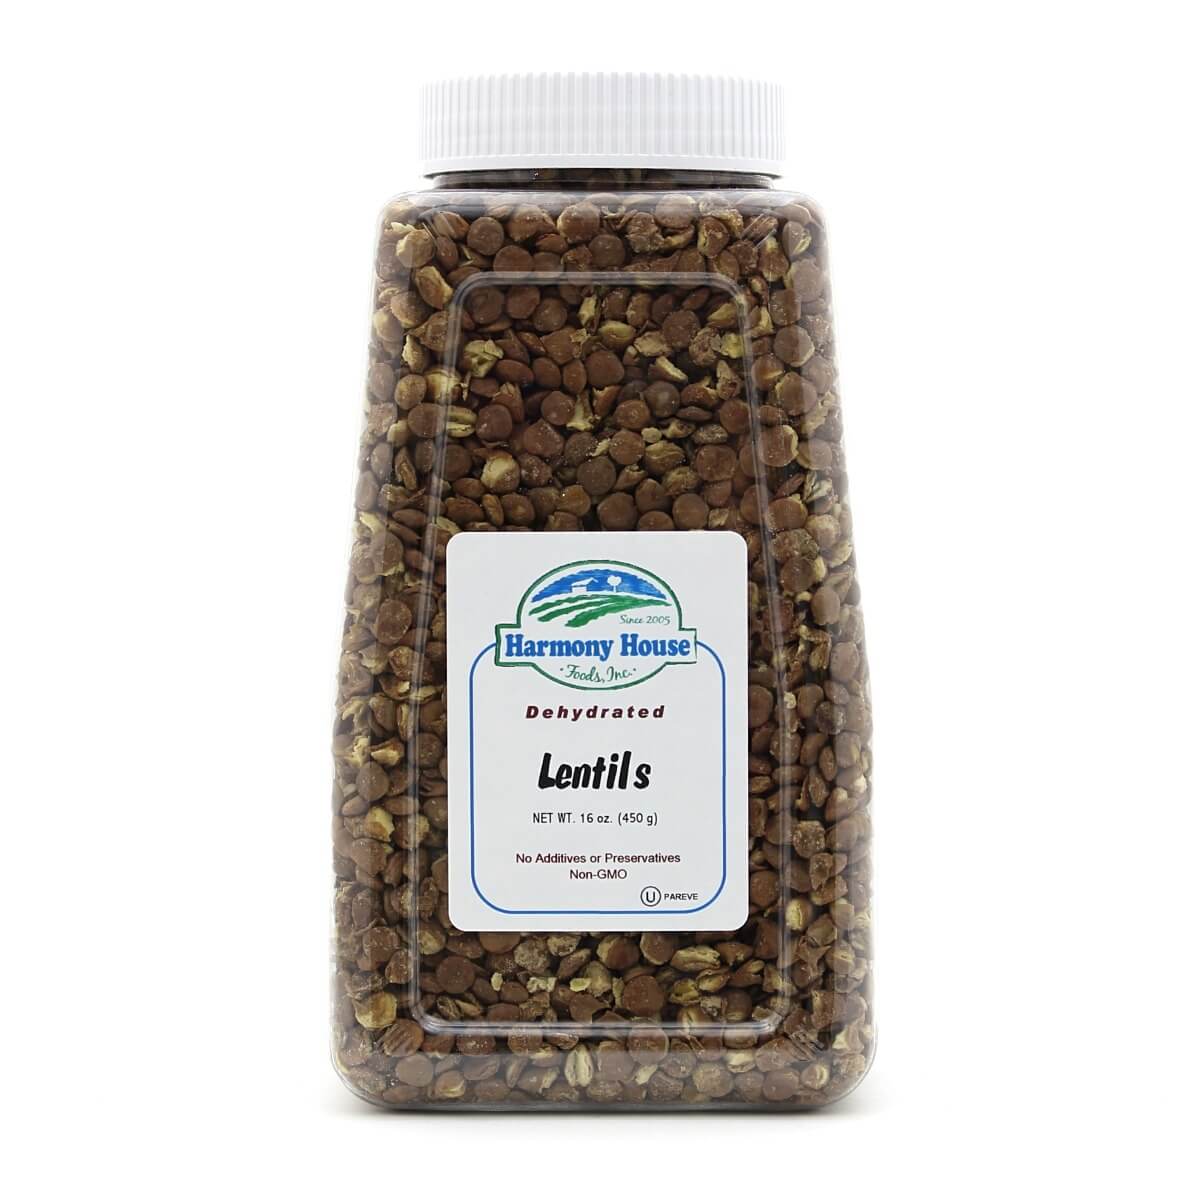 A jar of linseeds on a white background.